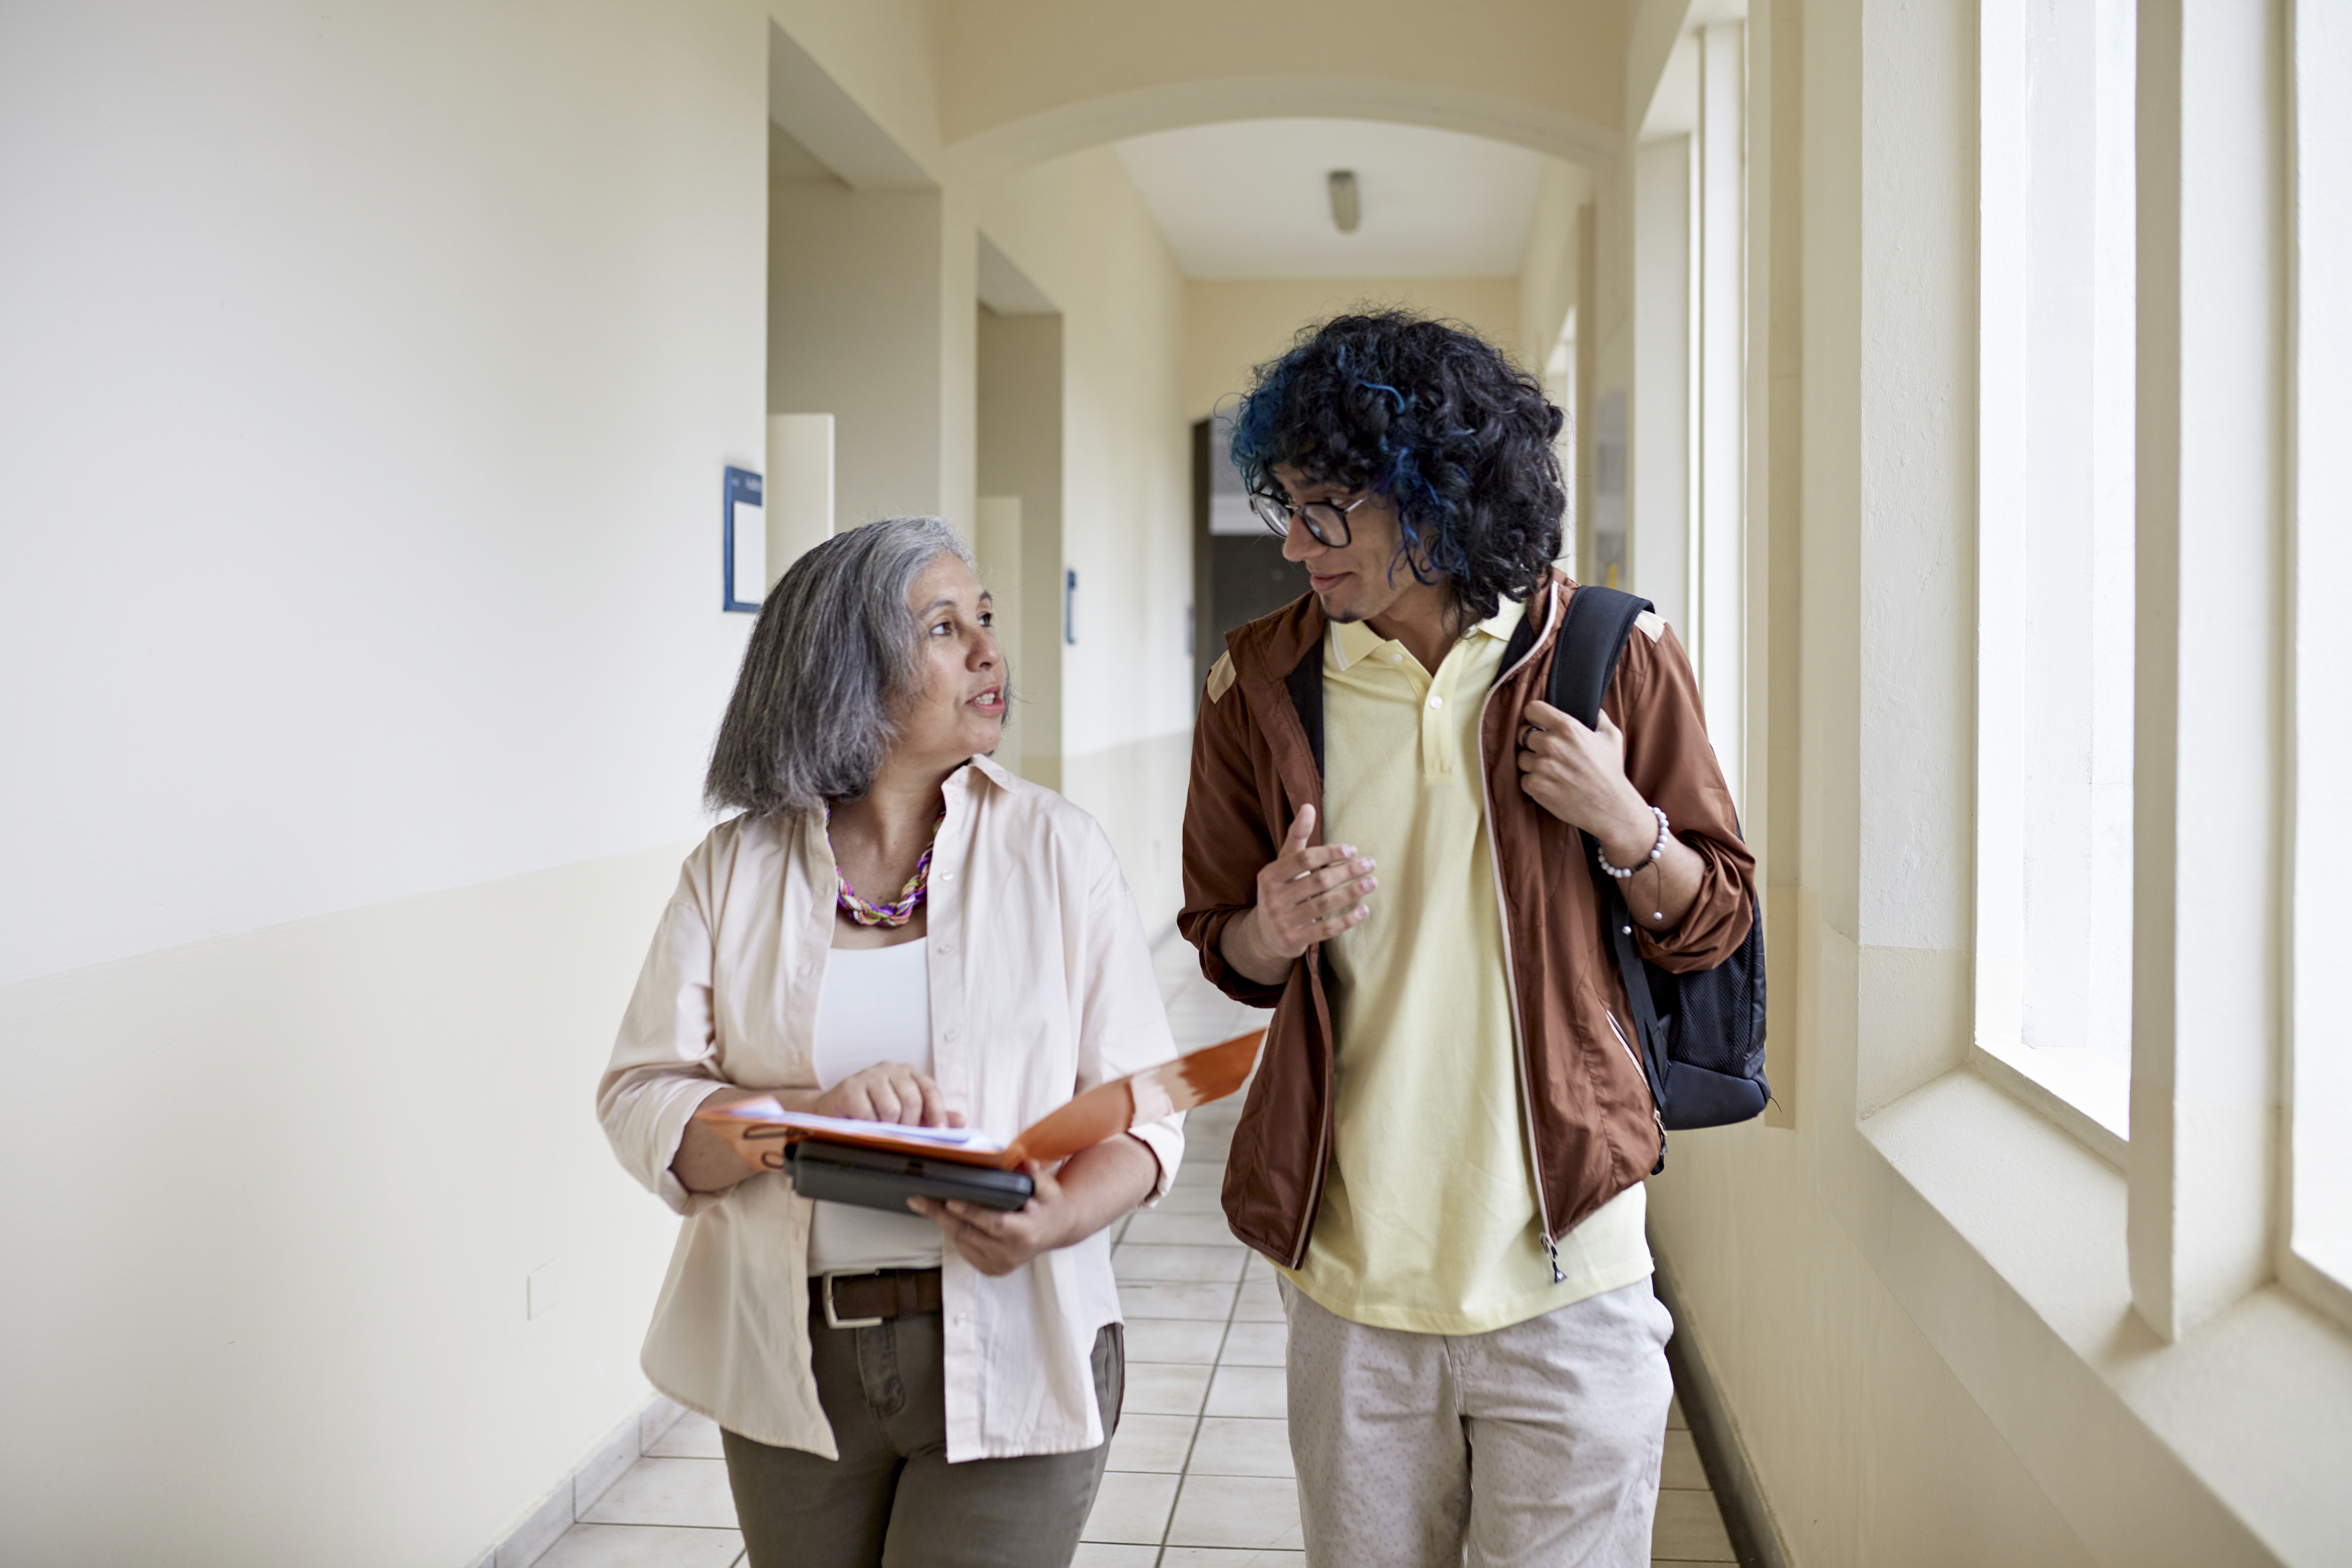 Two individuals conversing while walking through a hallway, one holding a tablet